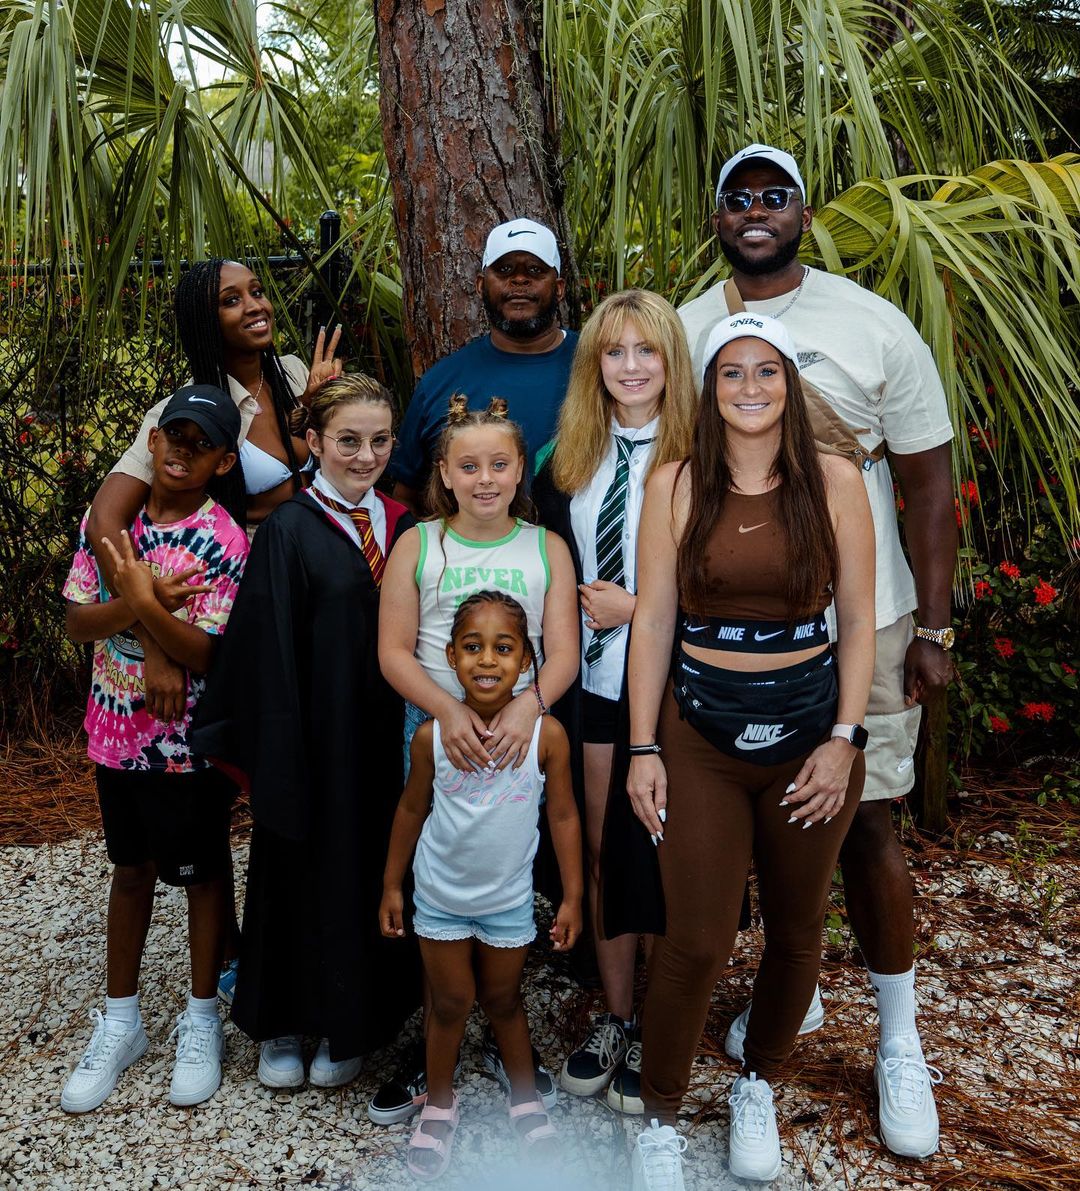 Teen Mom fans praise Leah Messer as she looks ‘amazing’ & ‘happy’ with Jaylan Mobley on 
family vacation in Florida